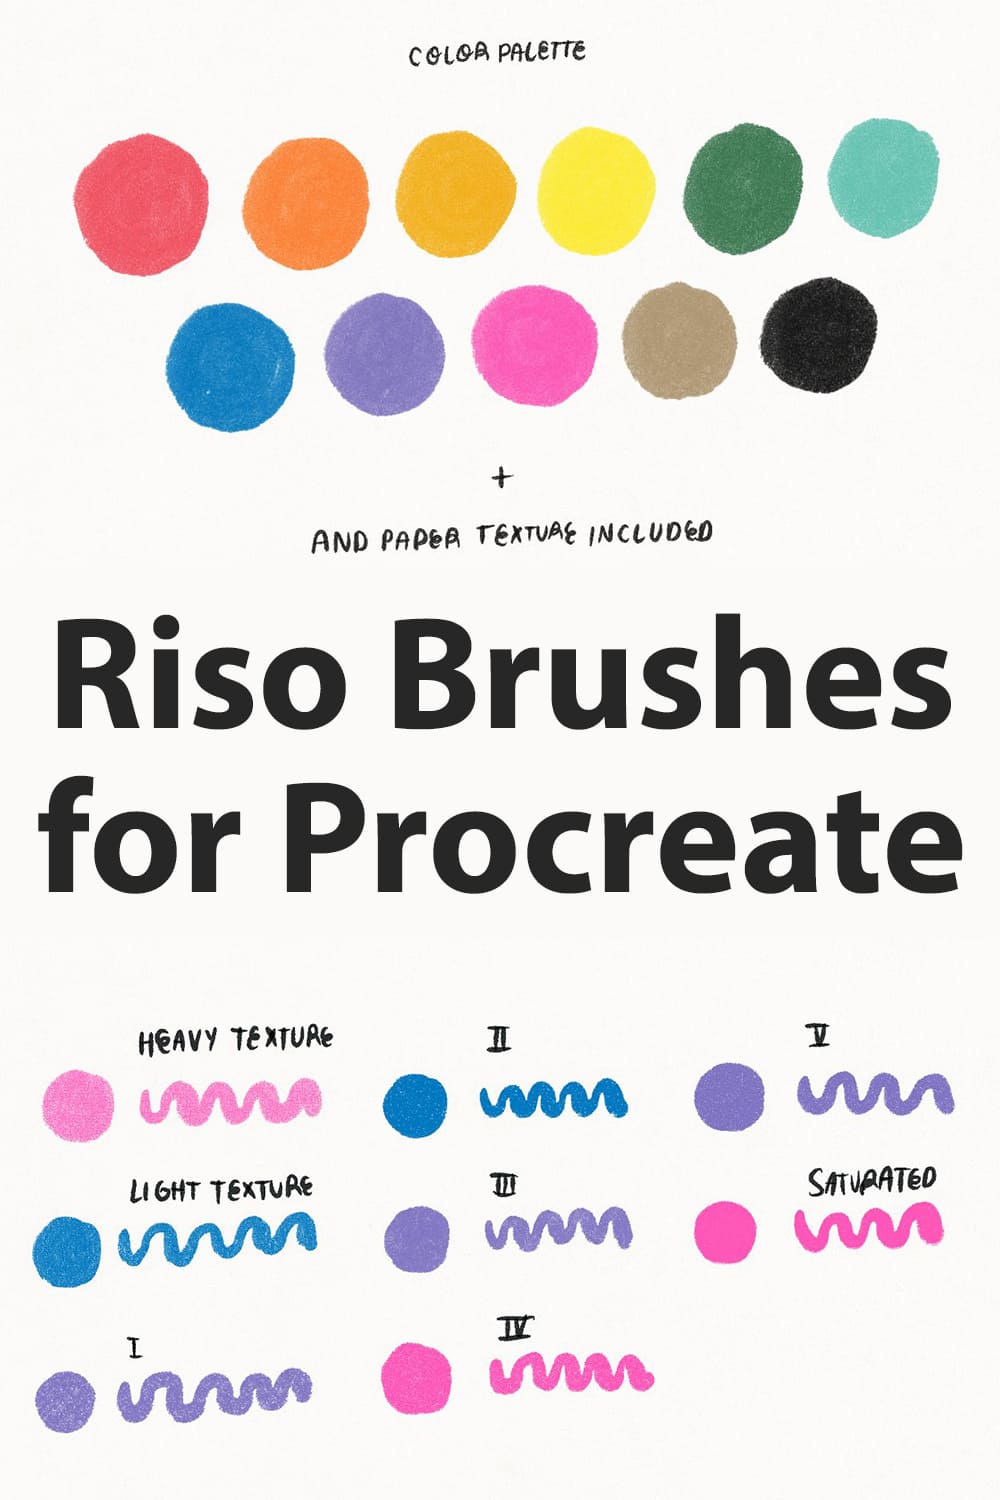 Riso Brushes For Procreate - Texture Preview.